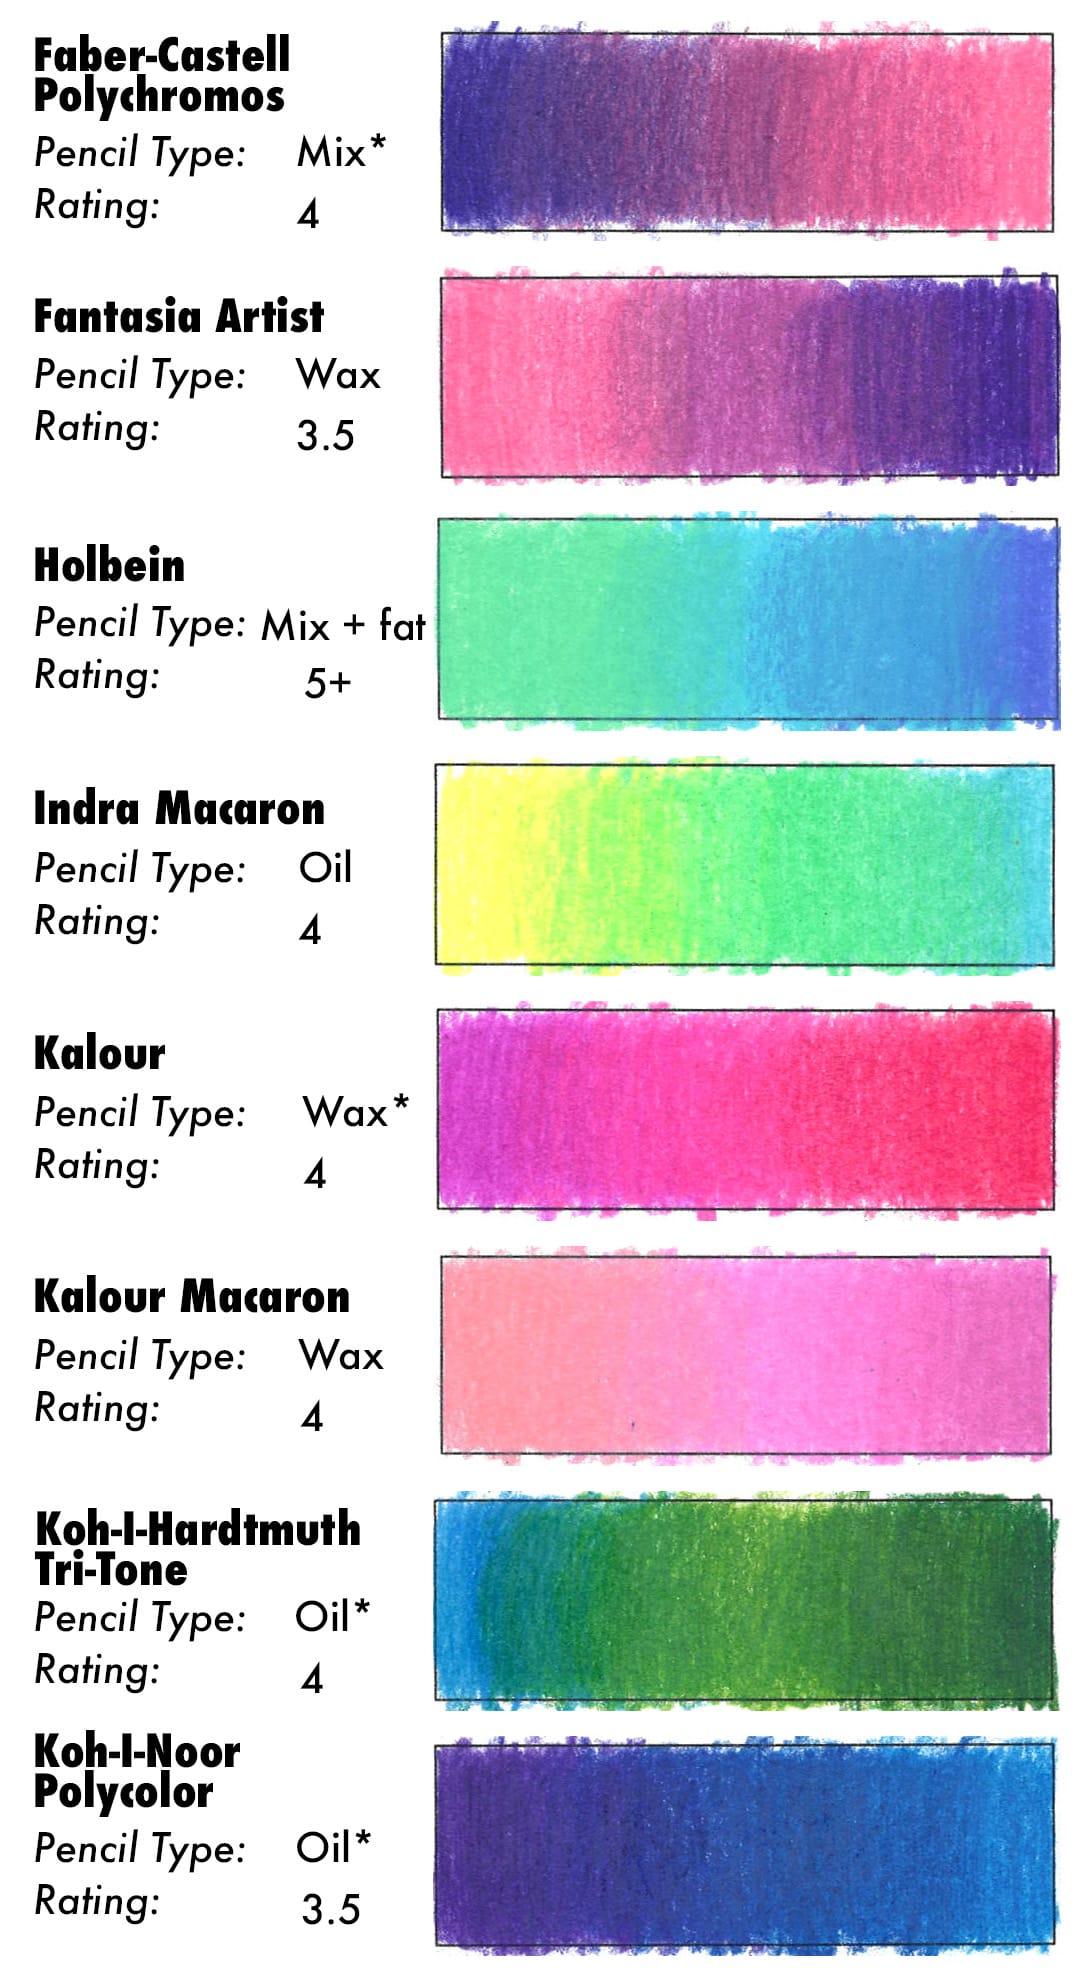 Colored Pencil Blending Results for Faber-Castell Polychromos, Fantasia Artist, Holbein, Indra Macaron, Kalour, Kalour Macaron, Koh-I-Hardtmuth Tri-Tone, and Koh-I-Noor Polycolor.